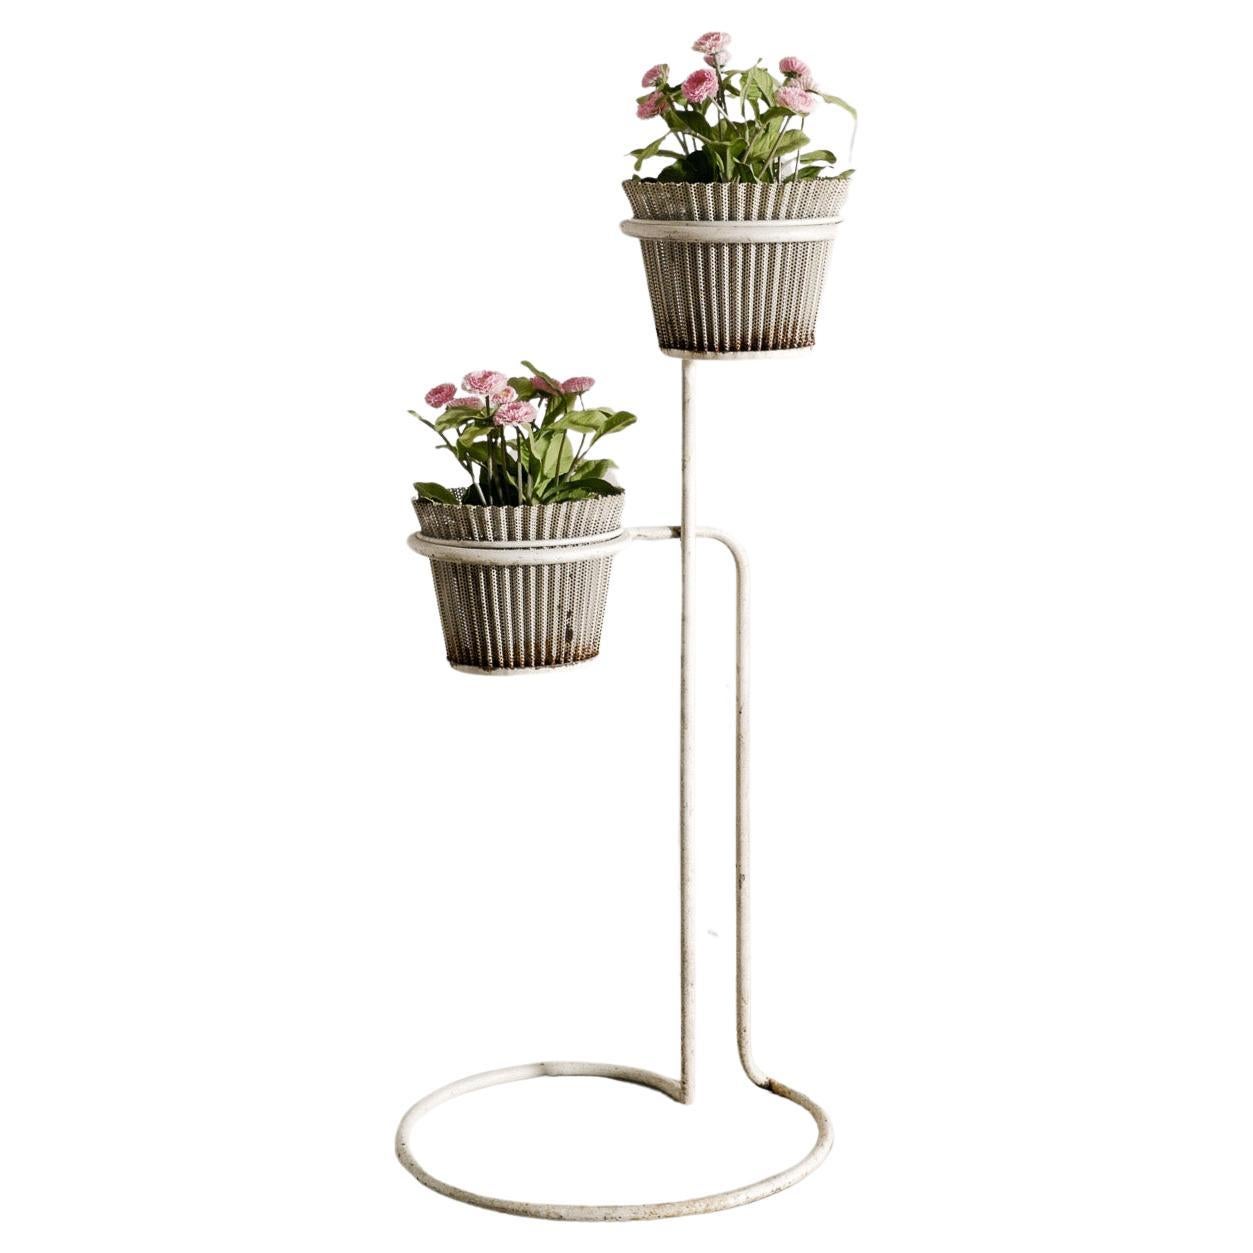 White Mid Century Plant Rack in by Metal Mathieu Matégot Produced in France 1950 For Sale